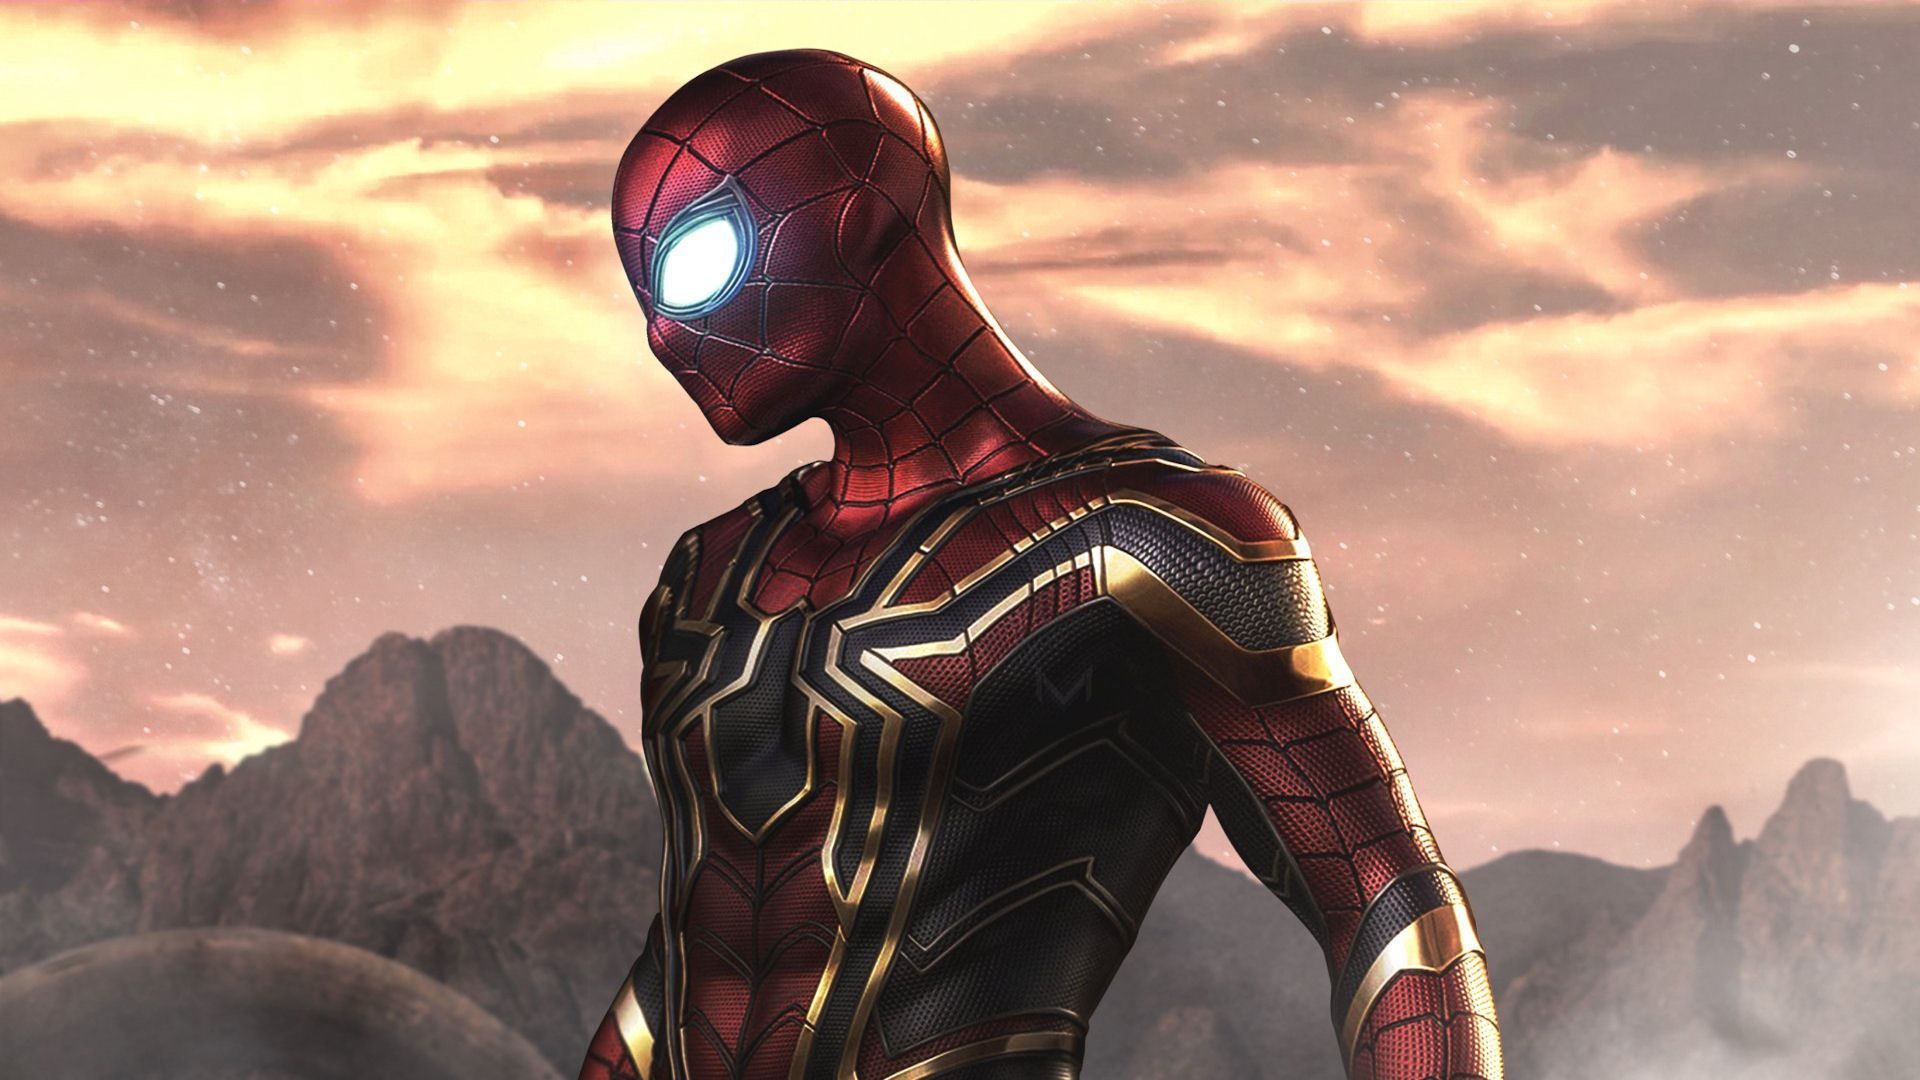 Cool Marvel Wallpapers HD # 2 - Epic Heroes Select - 45 x Imagen